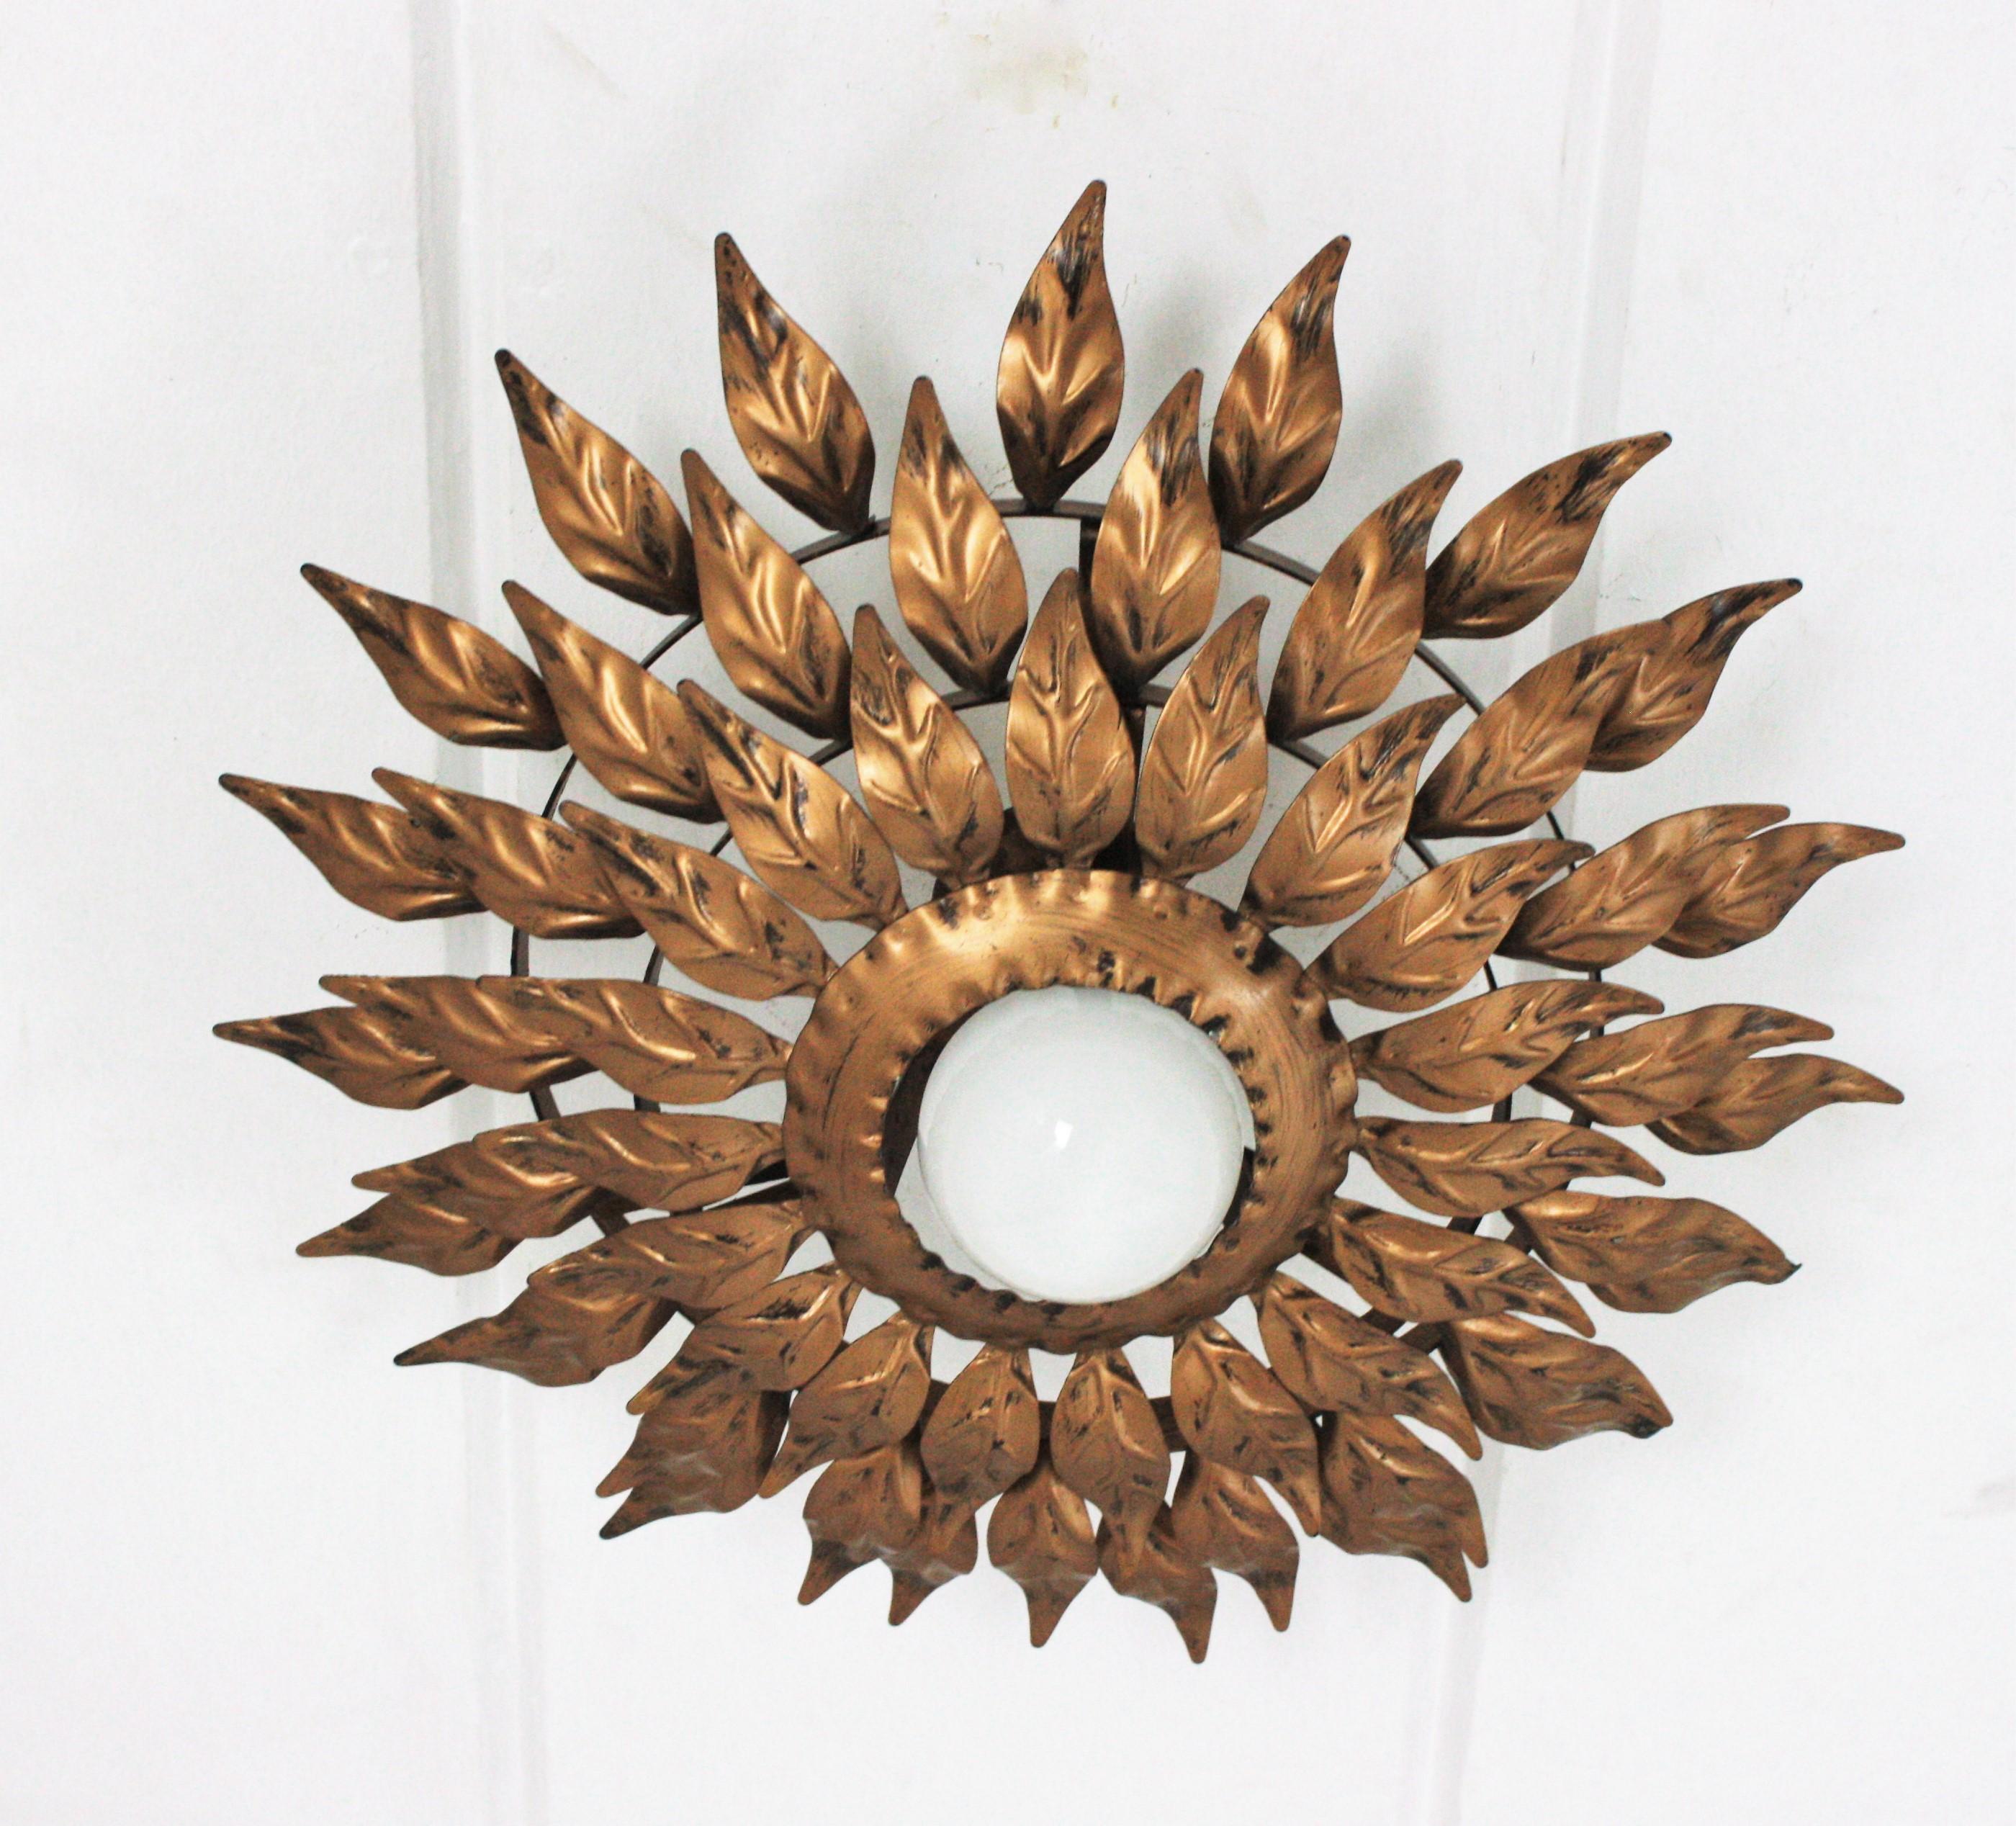 Gilt metal triple layered leafed sunburst ceiling flush mount. Spain, 1960s.
Three layers of leaves
An eye-catching sunburst or flower burst ceiling lamp with three layers of small gilt iron leaves surrounding a central exposed bulb.
It can be